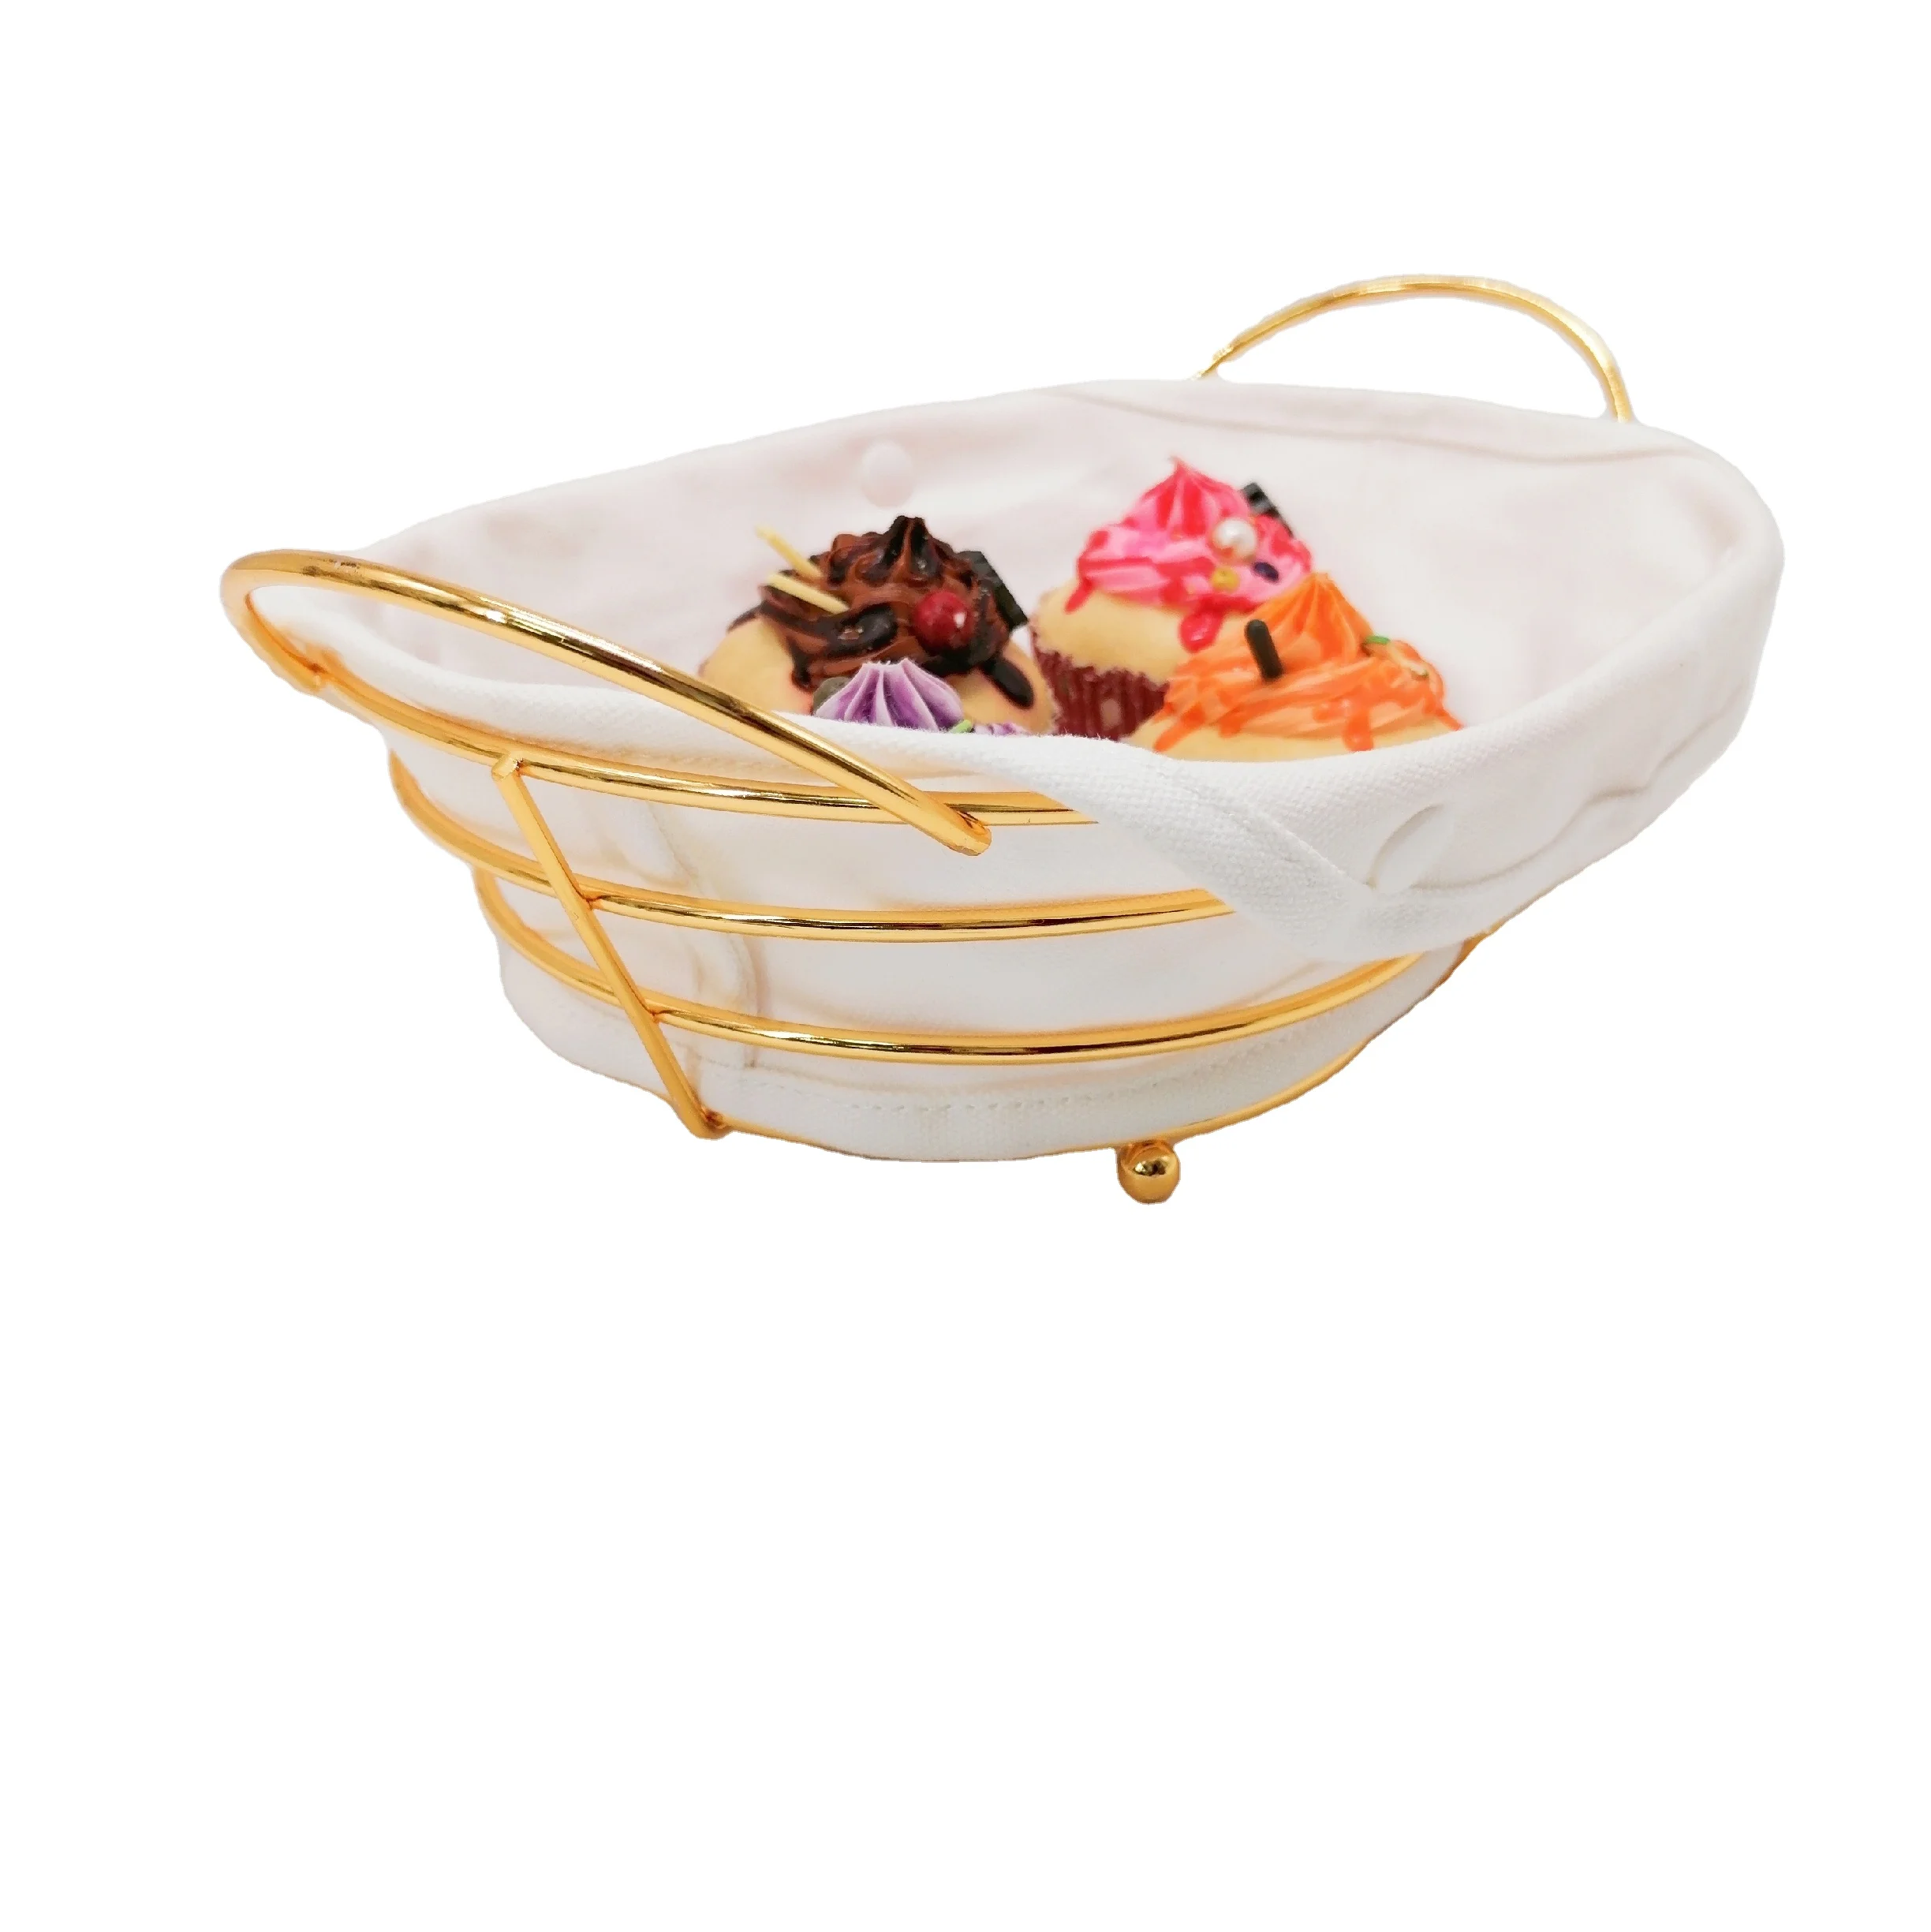 

Kitchen Use Fruit Bowl Vegetable Holder Round Metal Wire Fruit Basket Bread Basket With Fabric Lining, Black gold silver